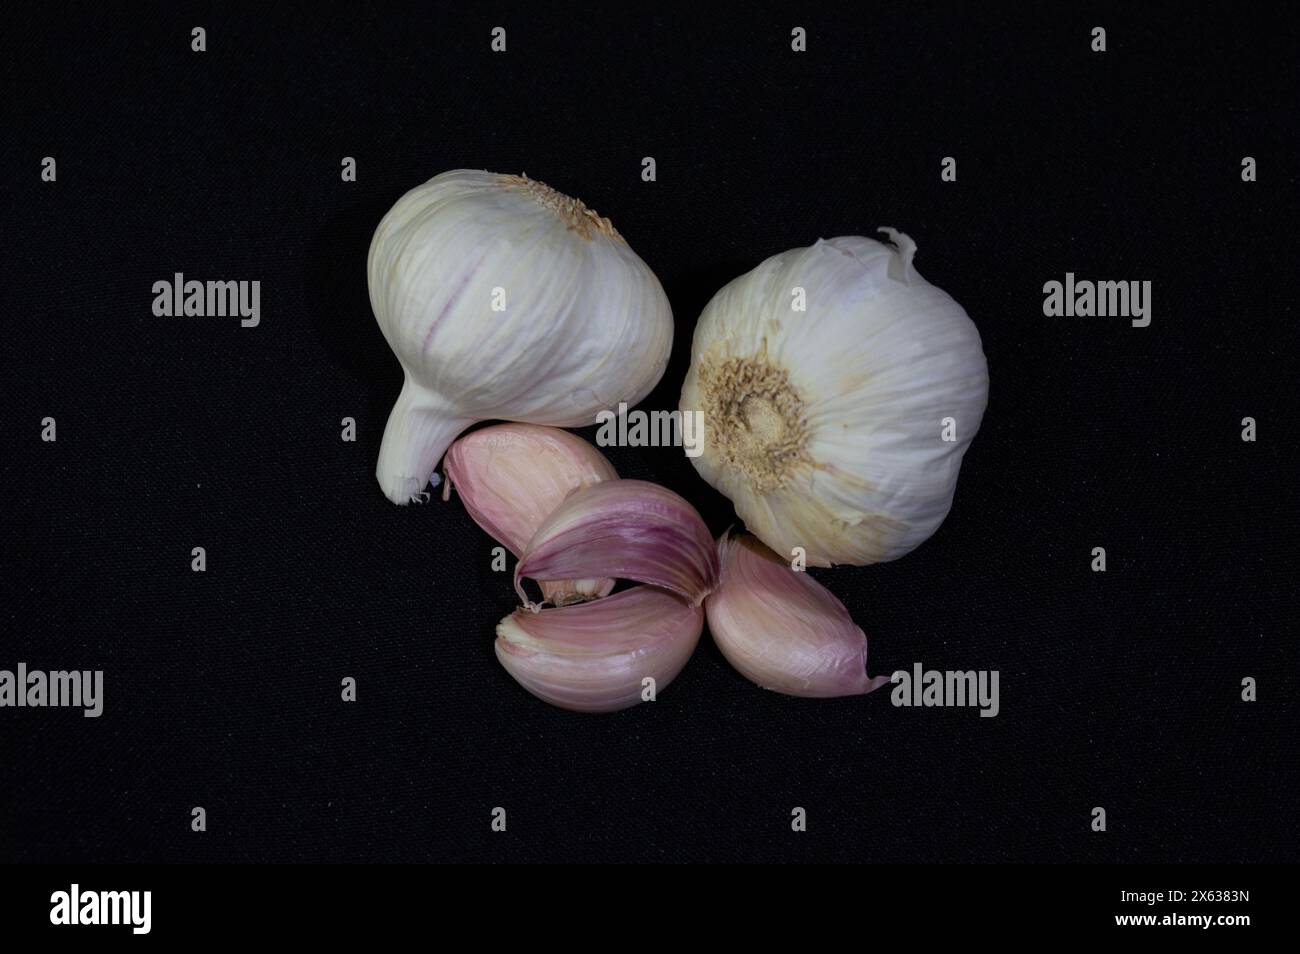 Garlic, tasty and healthy seasoning for foods Stock Photo